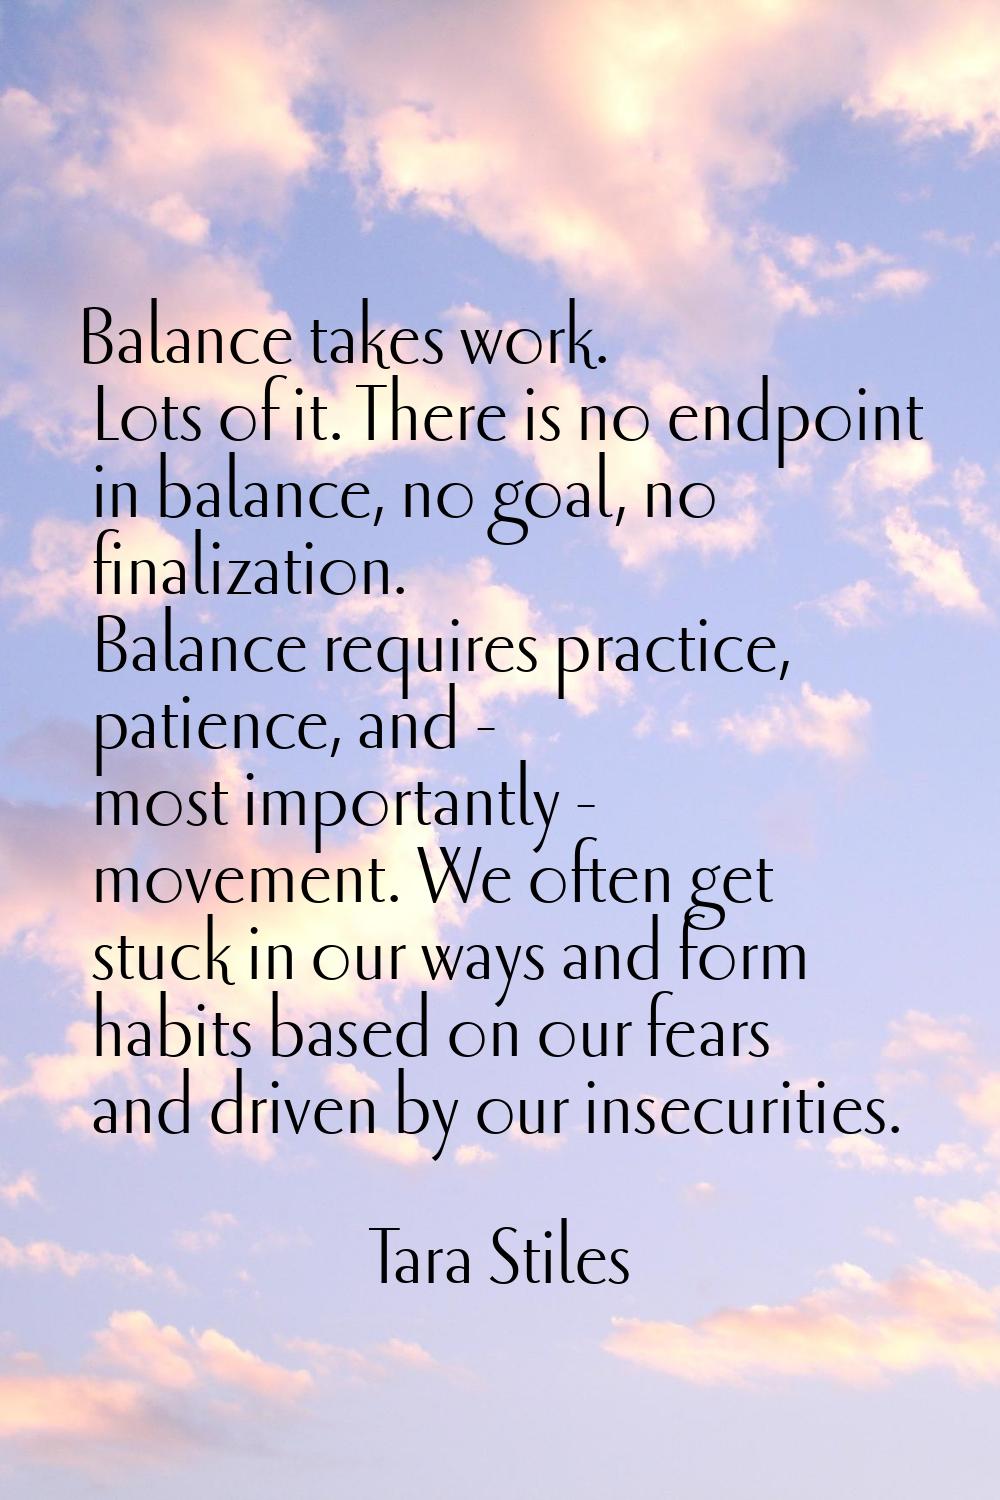 Balance takes work. Lots of it. There is no endpoint in balance, no goal, no finalization. Balance 